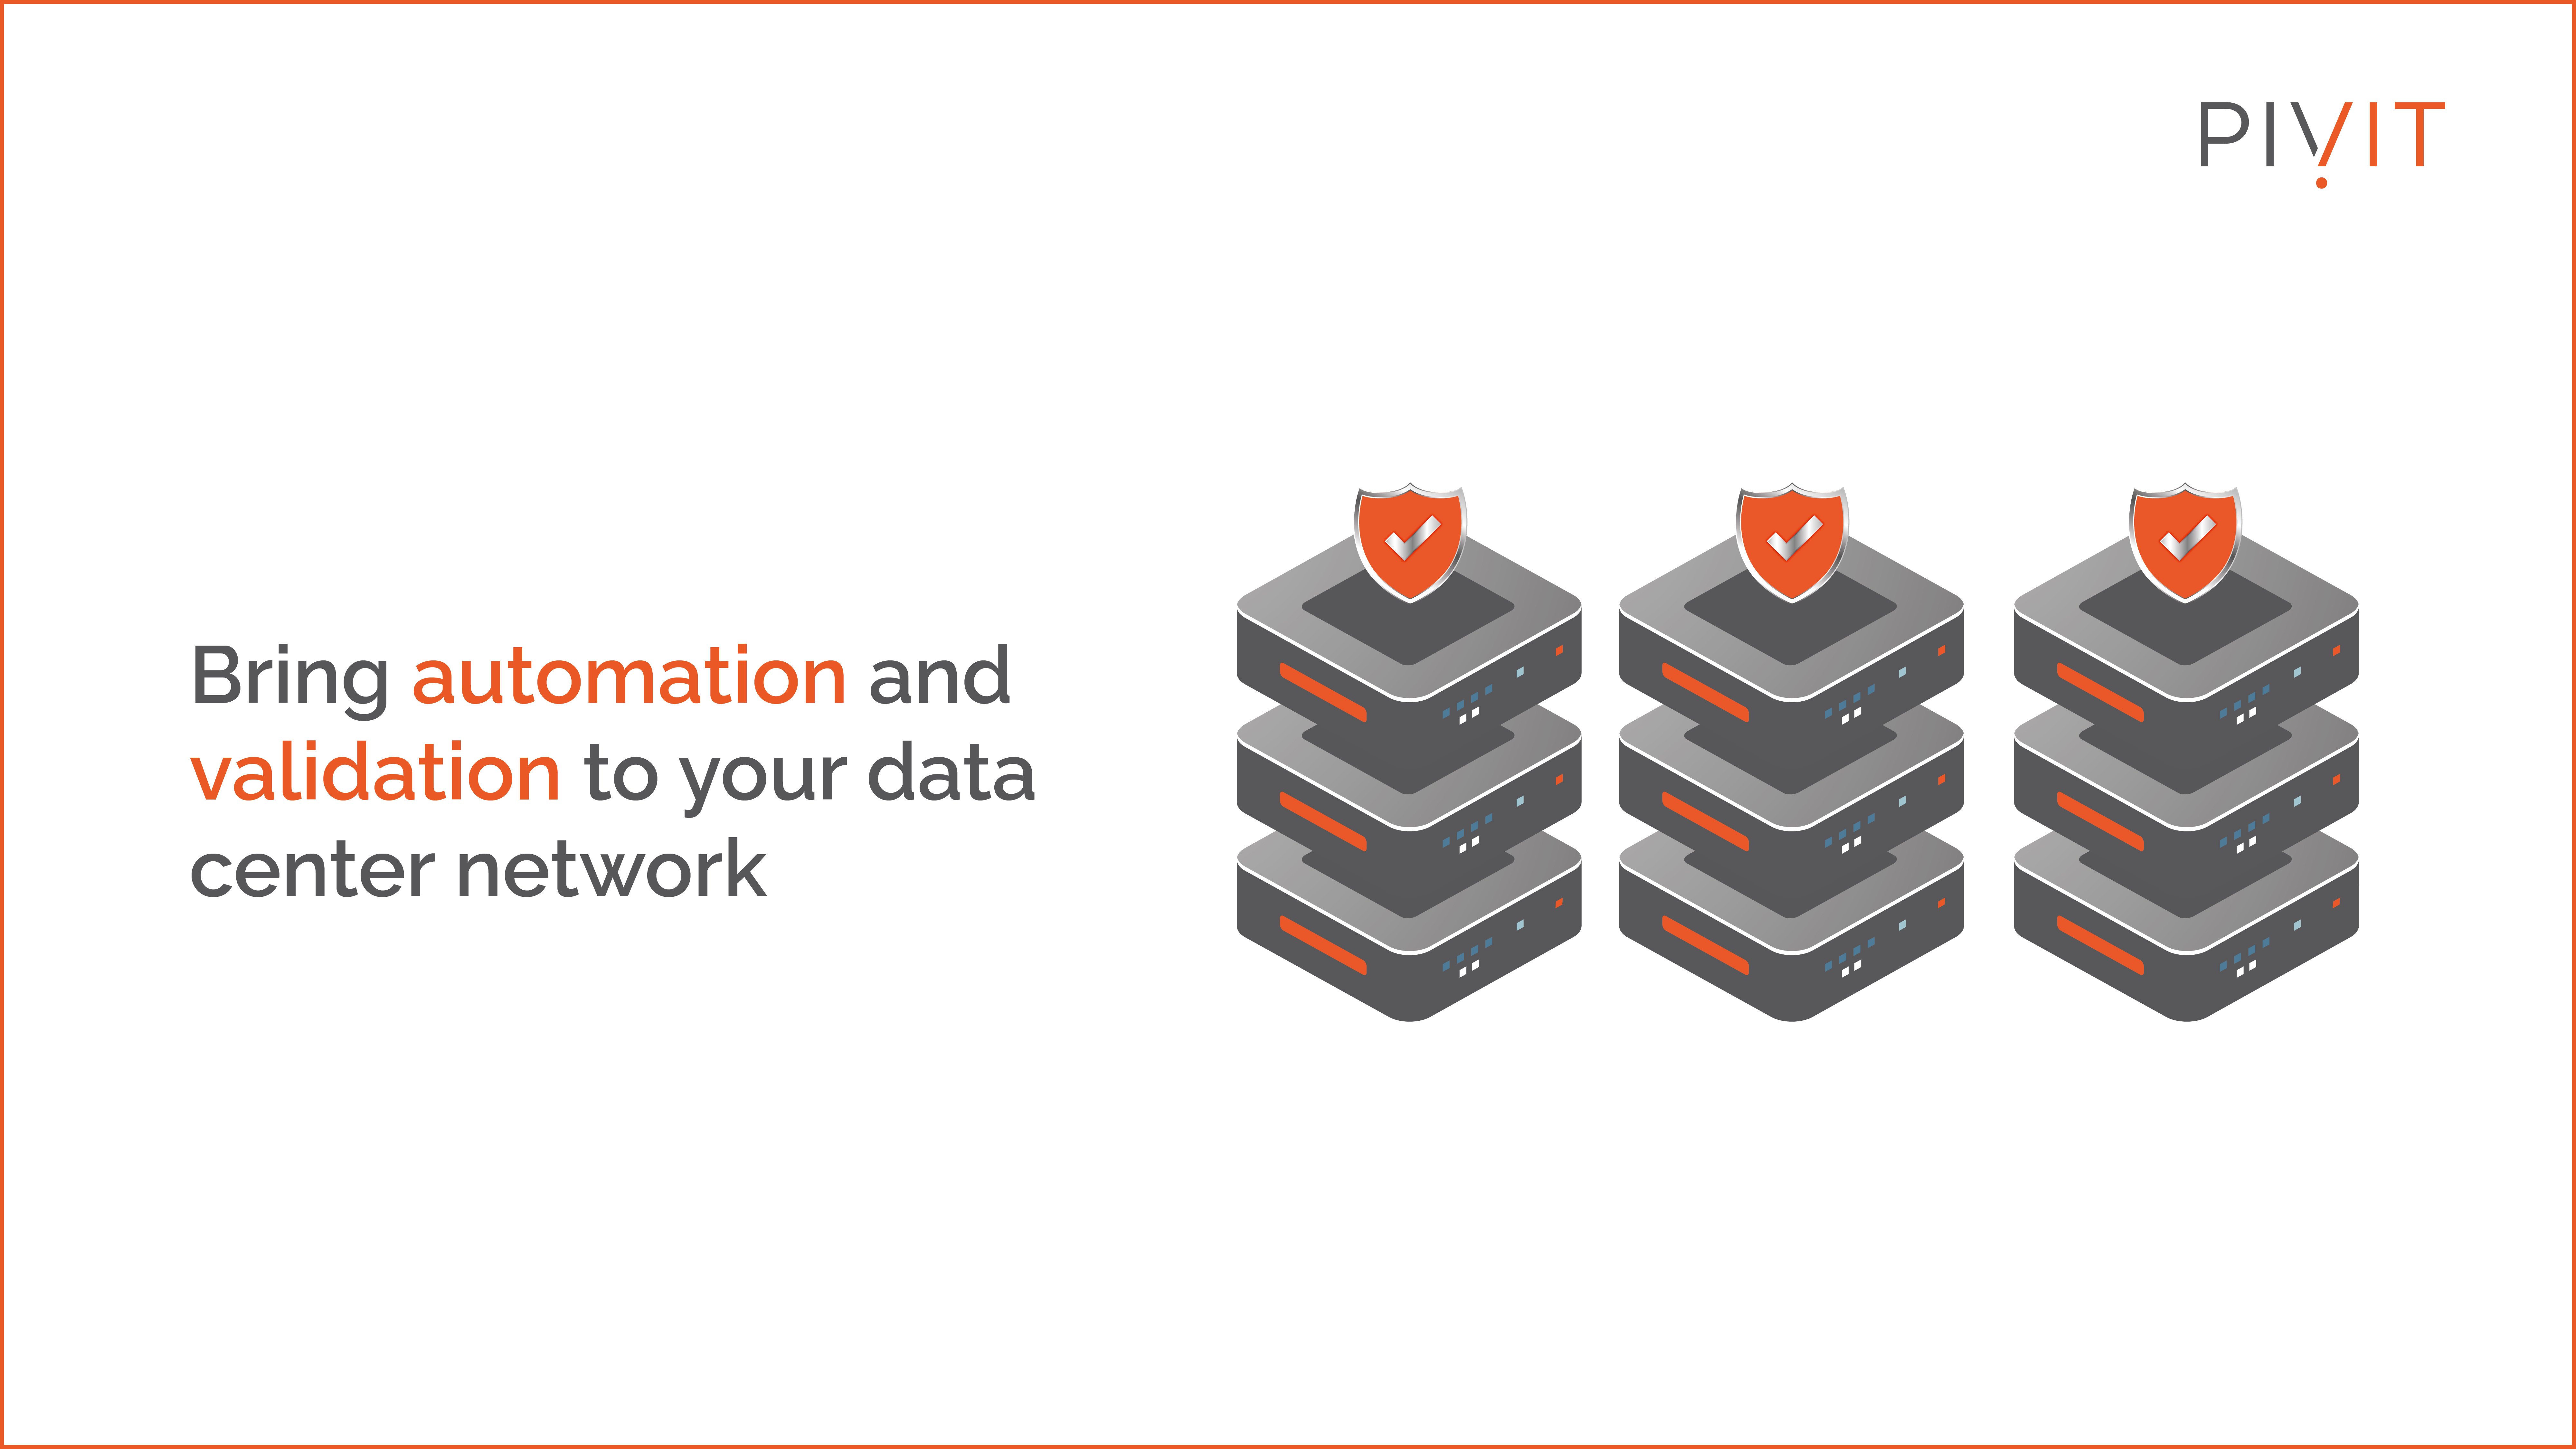 Bring automation and validation to your data center network